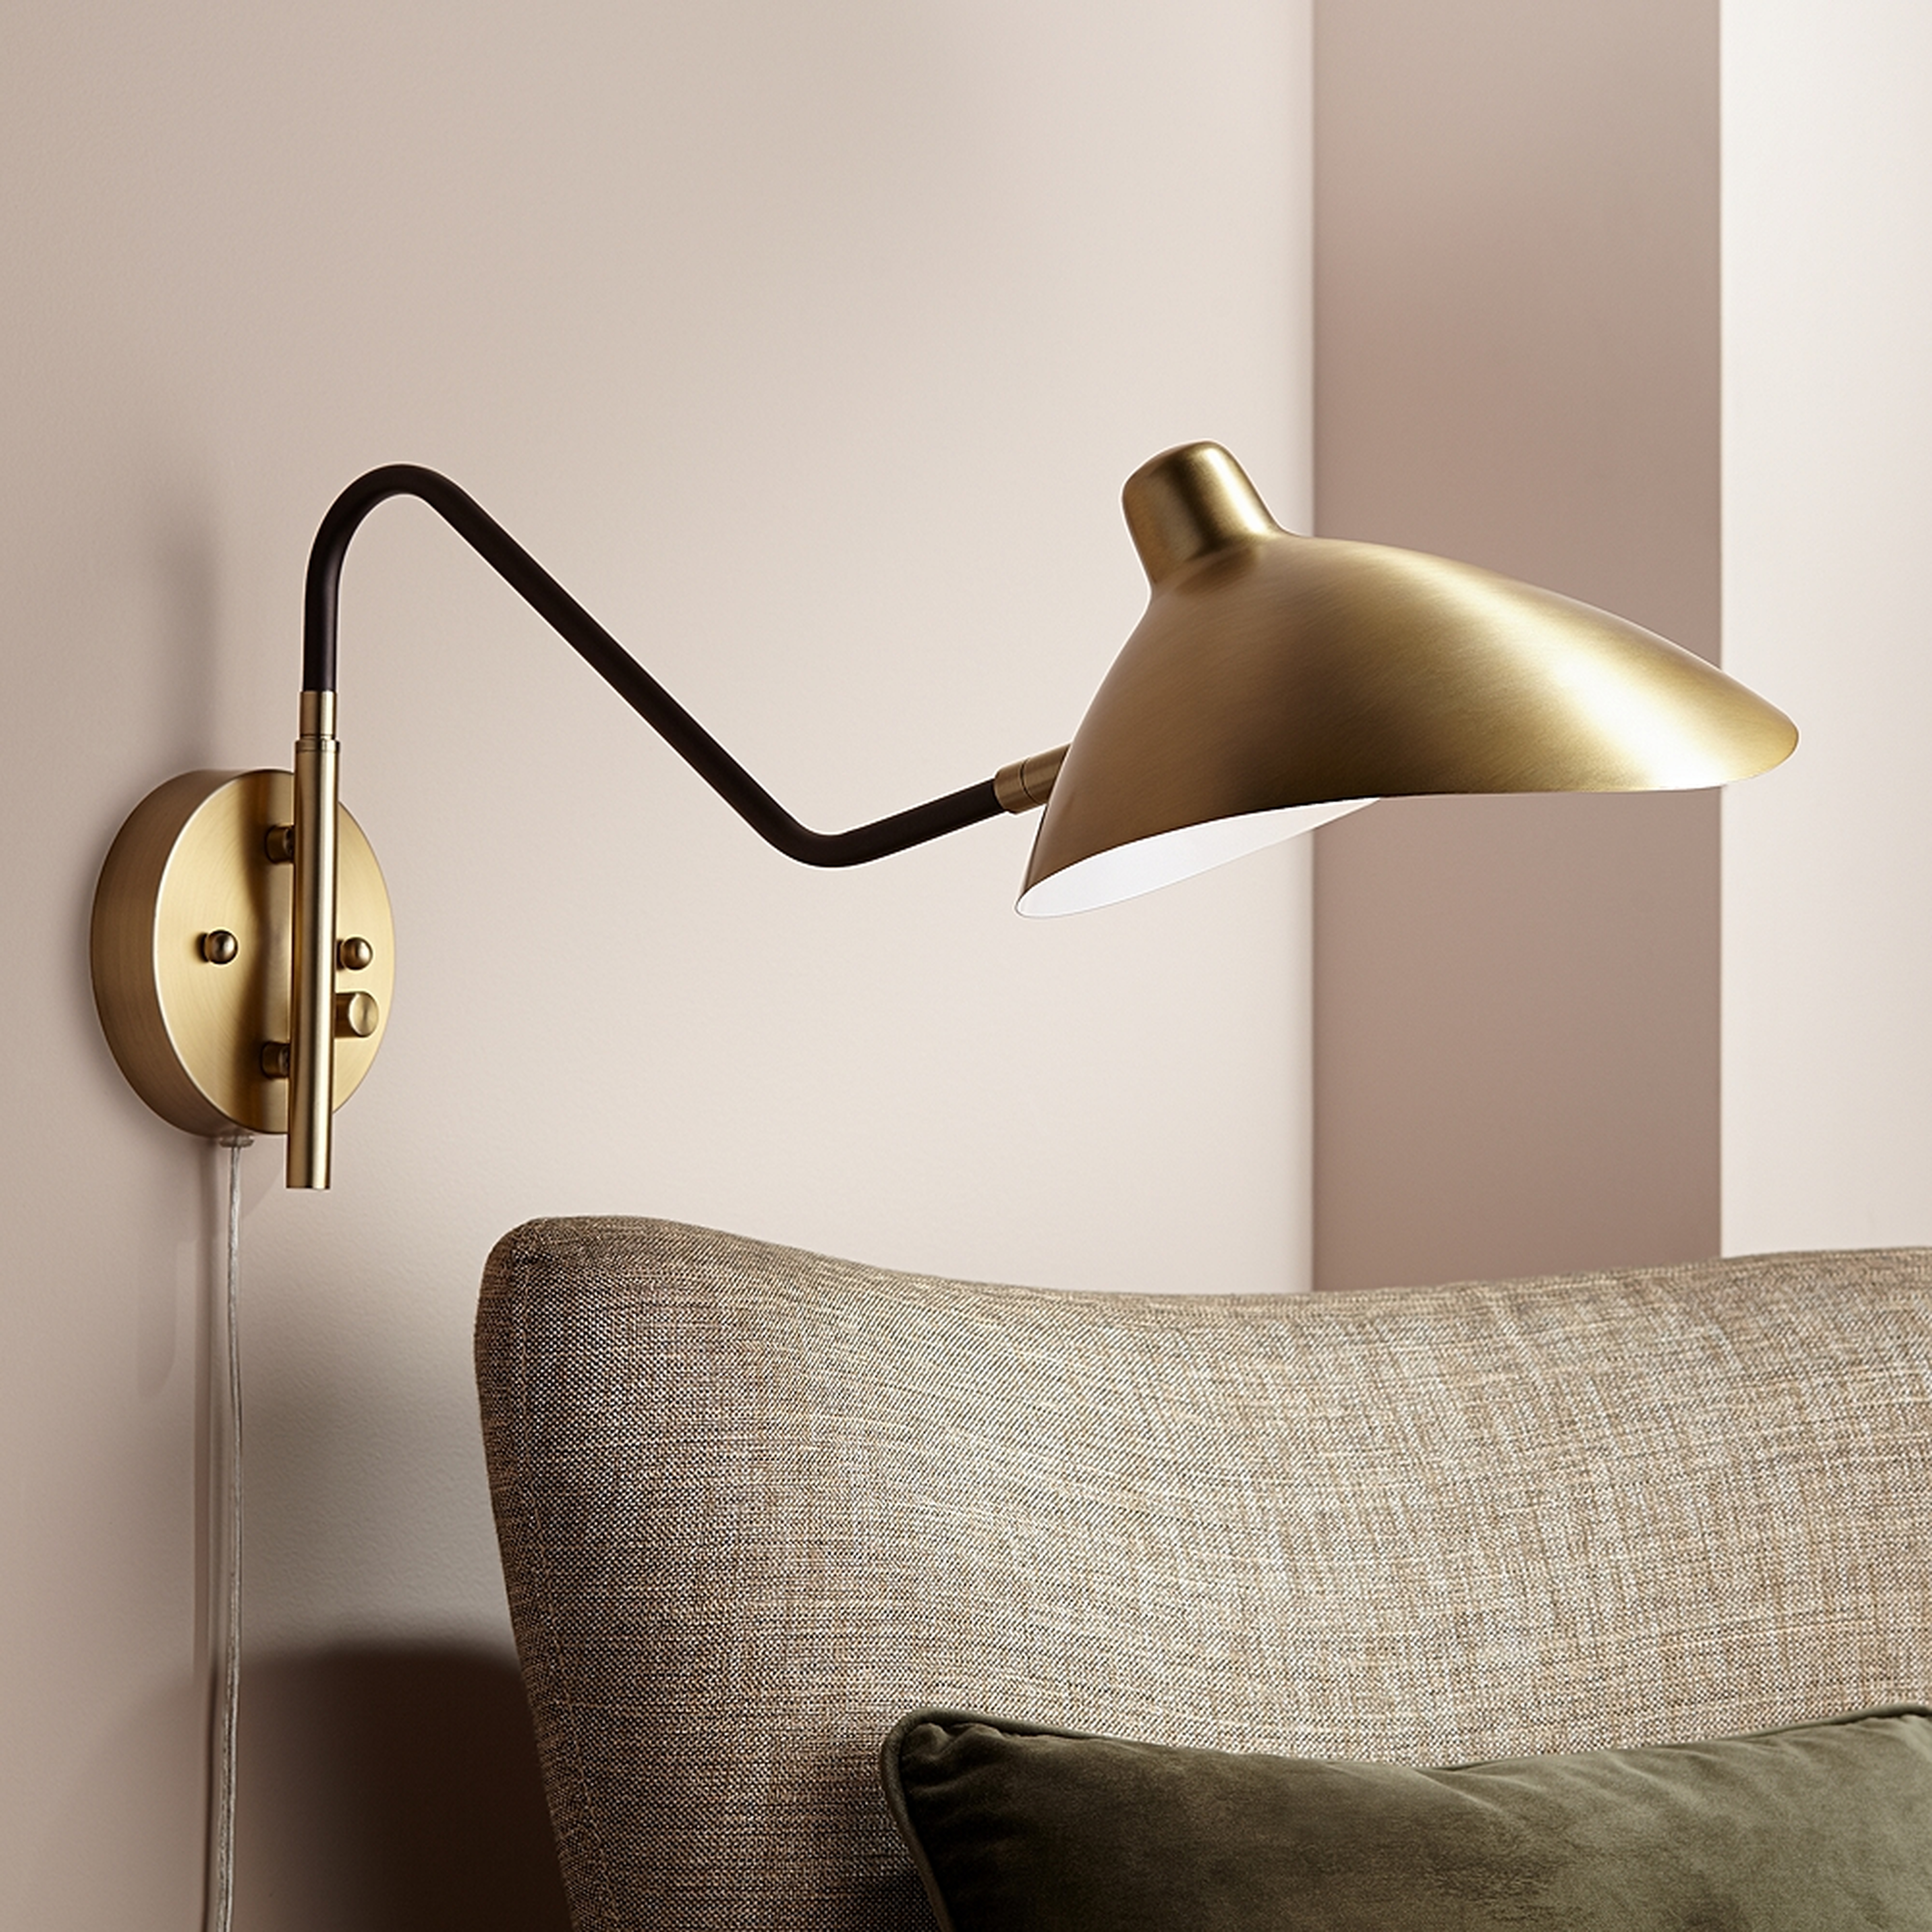 Colborne Brass and Bronze Plug-In Swing Arm Wall Lamp - Style # 76H61 - Lamps Plus